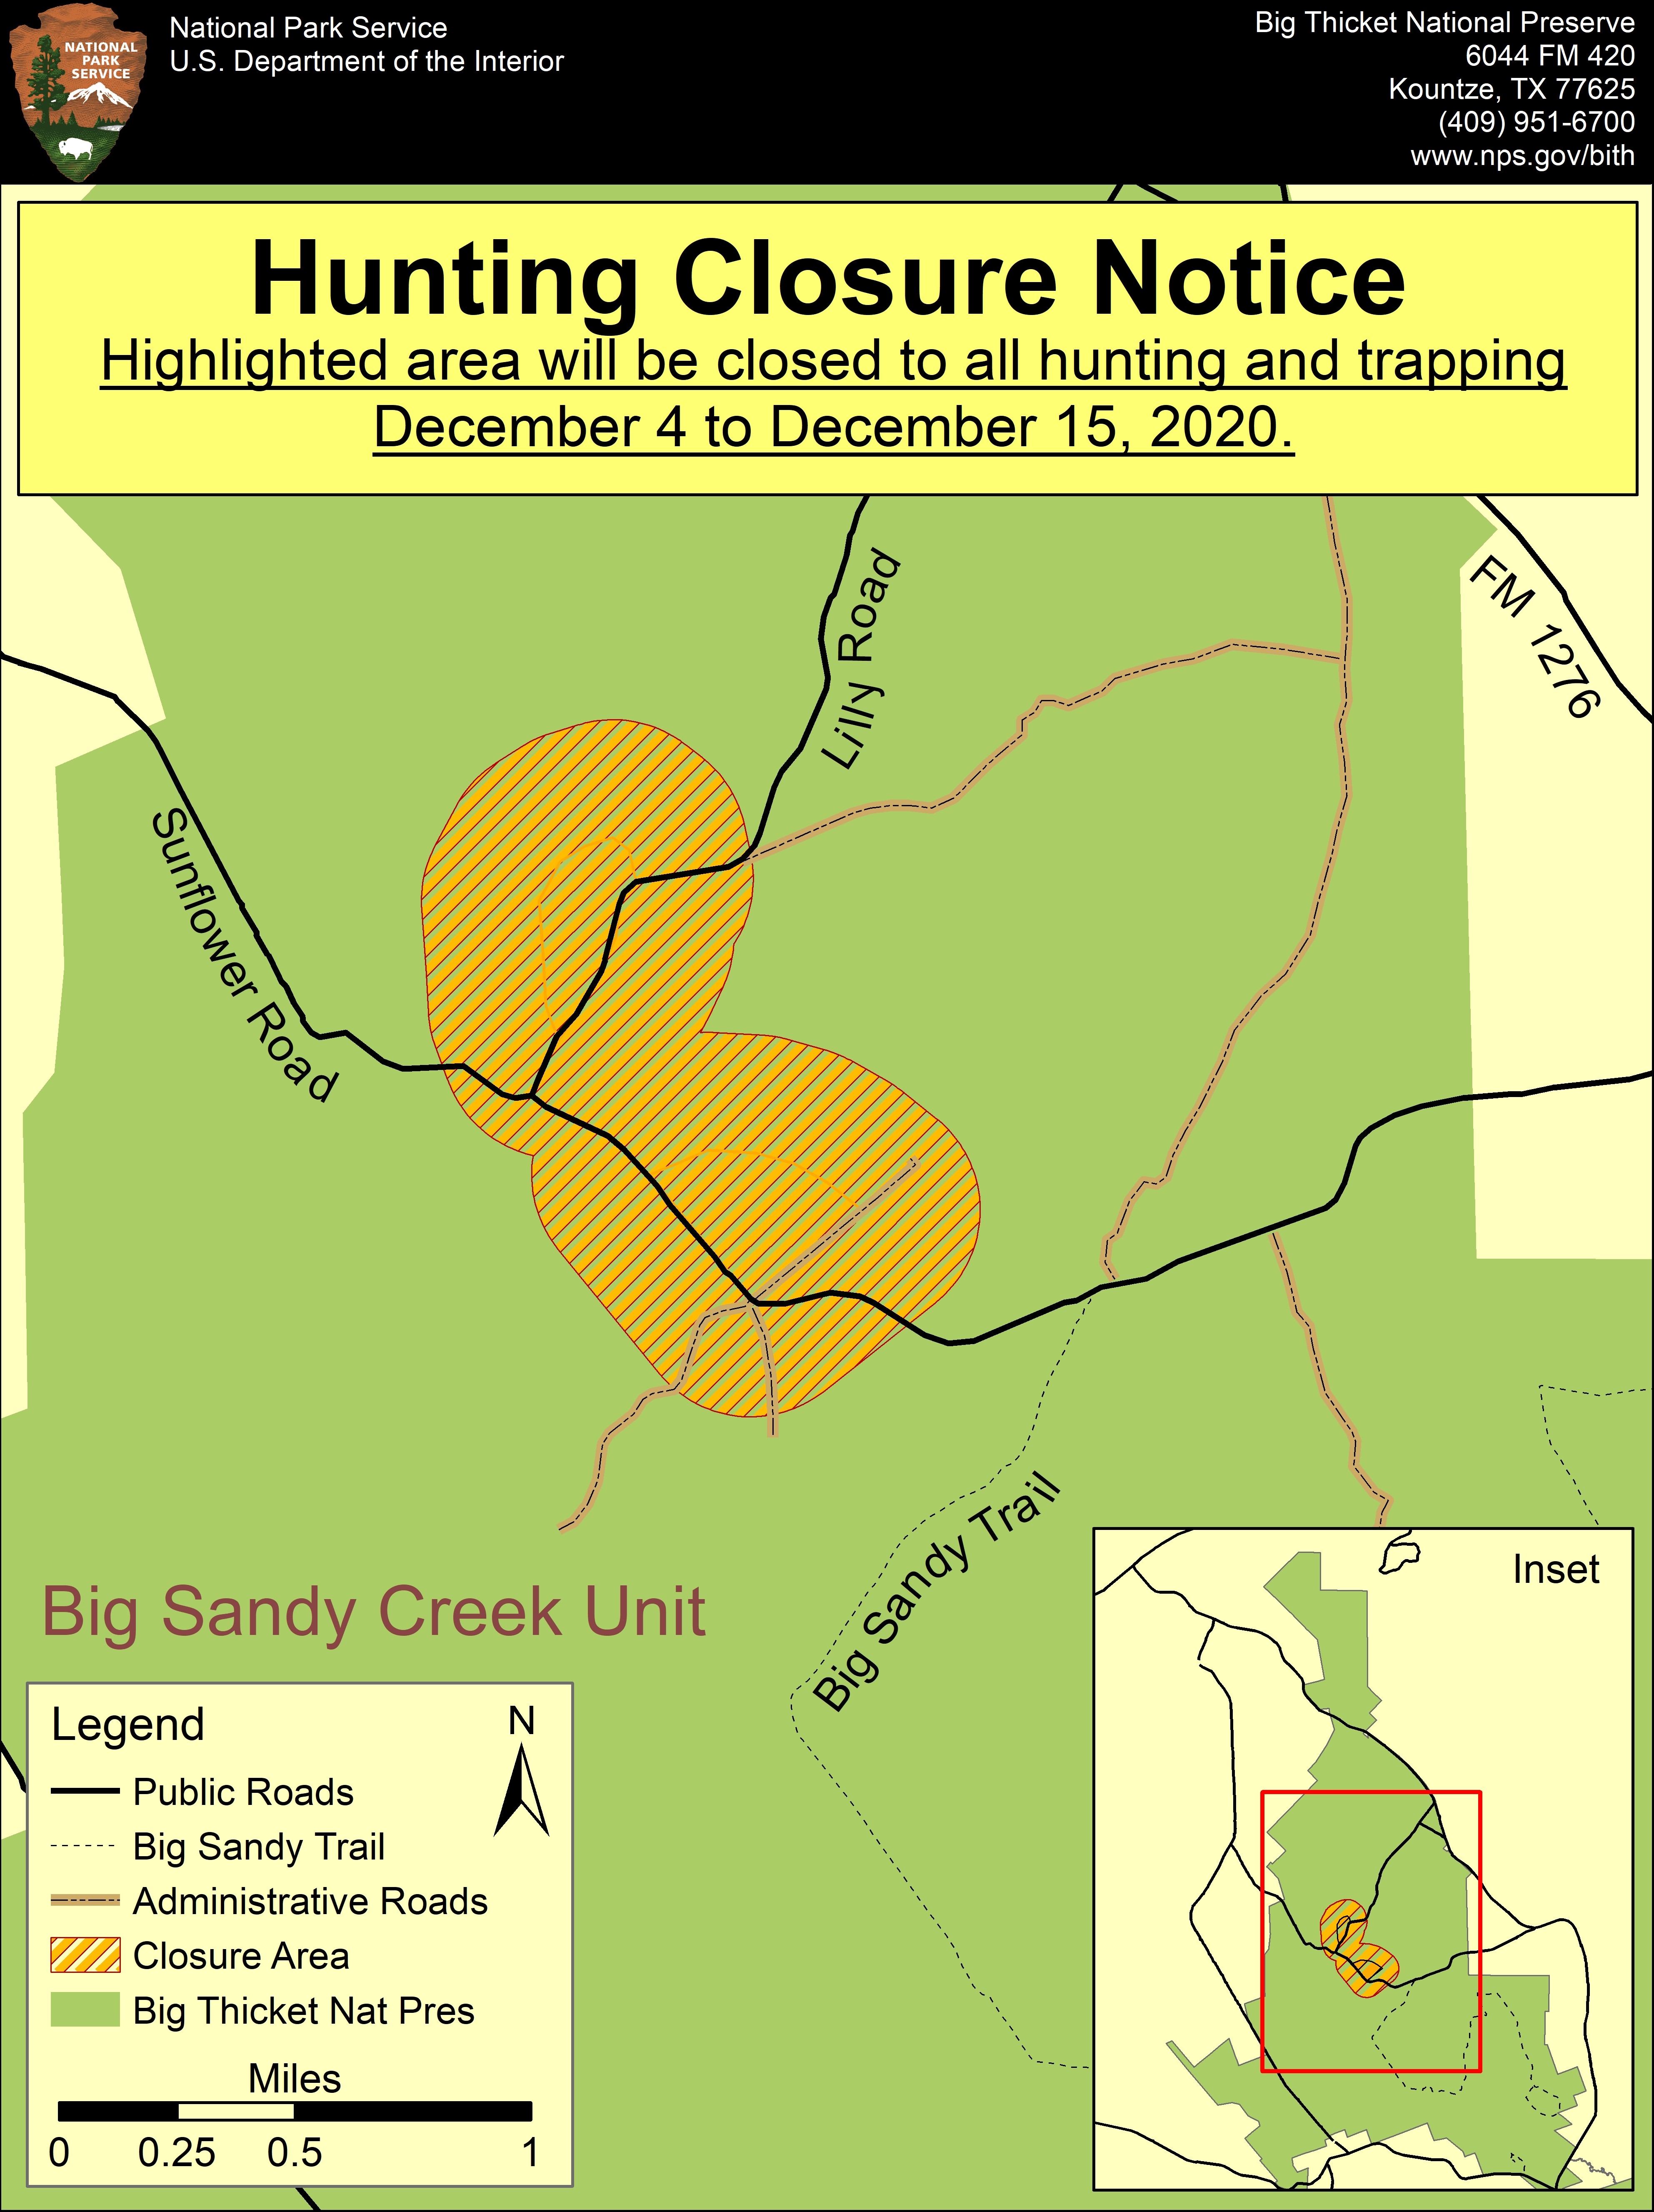 map of closure area, text reads "Hunting Closure Notice. Highlighted area will be closed to all hunting and trapping December 4 to December 15, 2020."